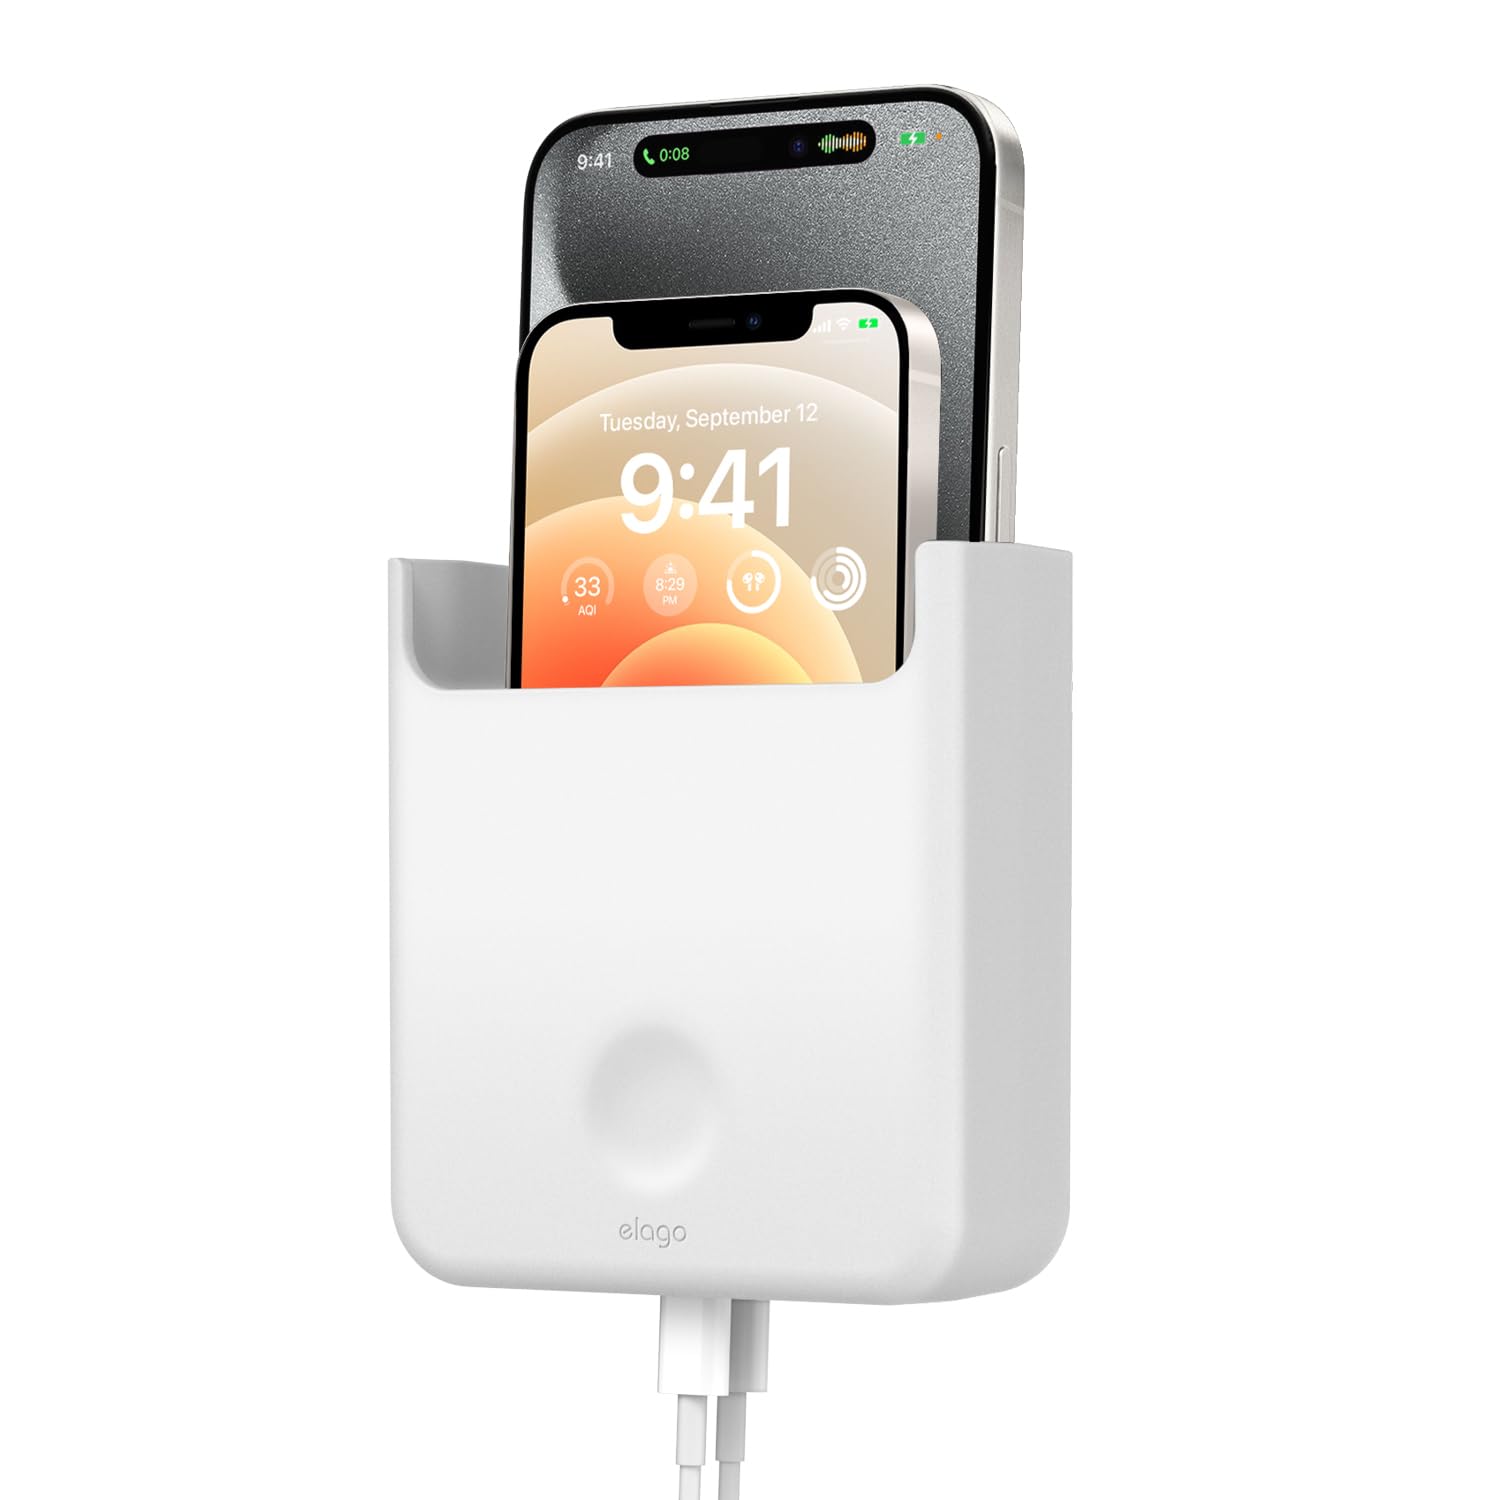 elago Phone Holder Mount Compatible with All Phone Models - Screw Mounting, Available Wired Charging, Caddy, Desktop Organizer, Remote, Pencil Holder, Office Supply, Media Storage, Wall Mount (White)